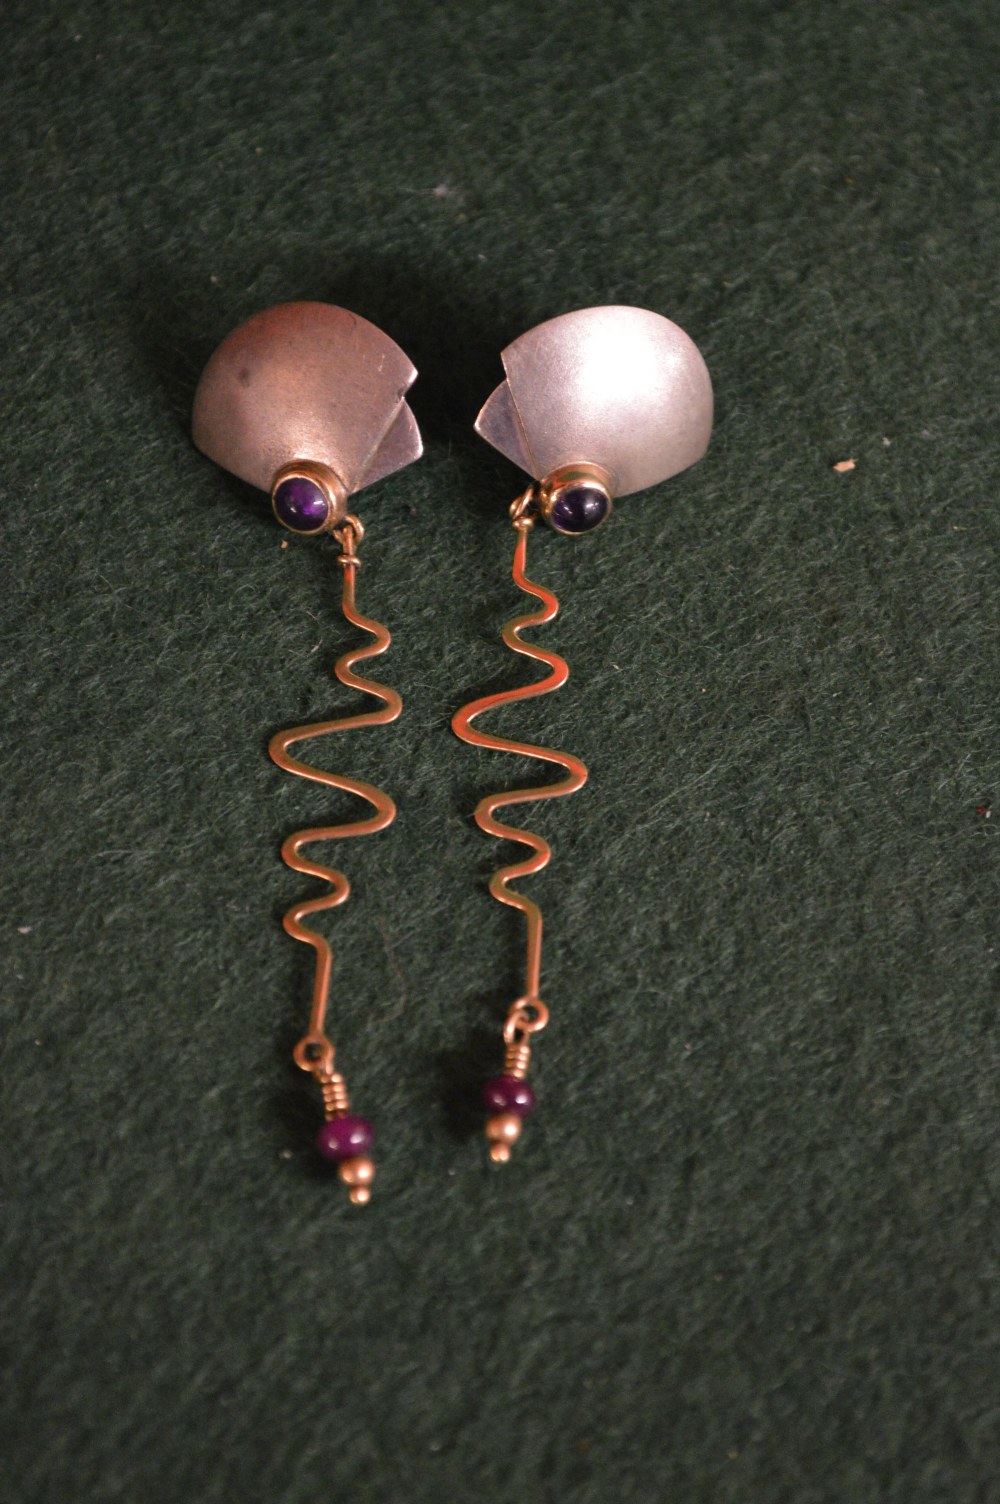 A pair of silver and amethyst earrings